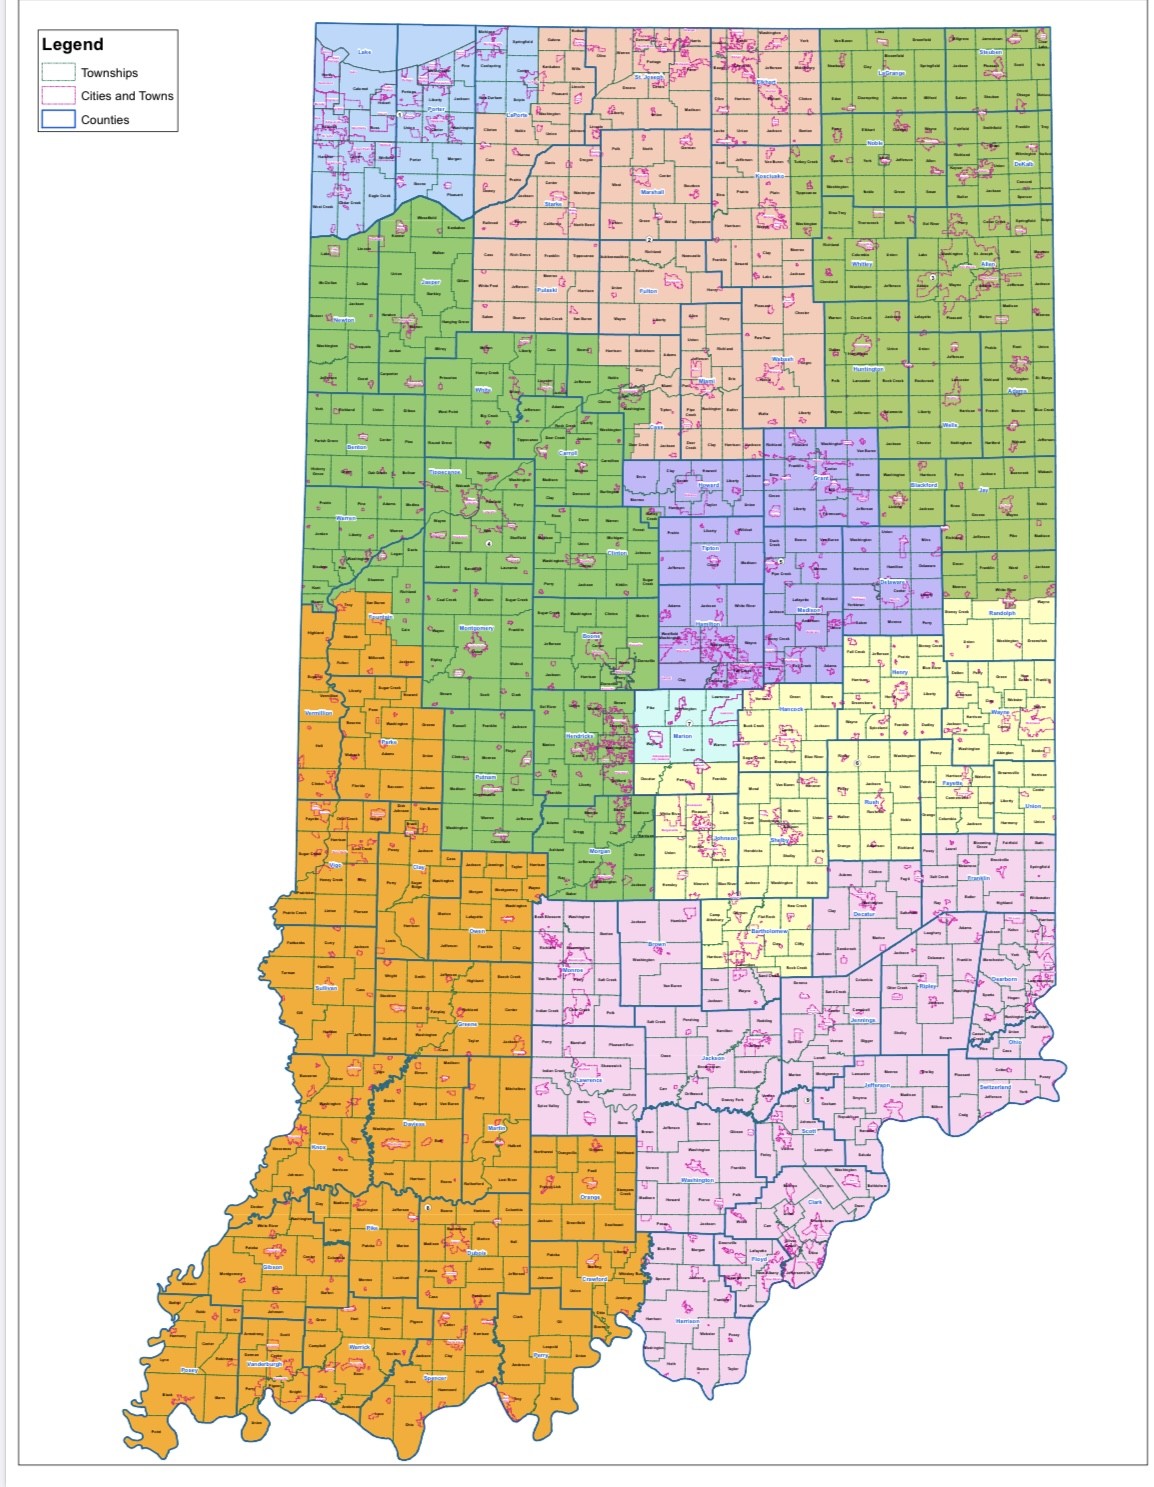 Indiana Representative District Map The New Maps Are Out: See Them Here And Follow For Updates - The Indiana  Citizen